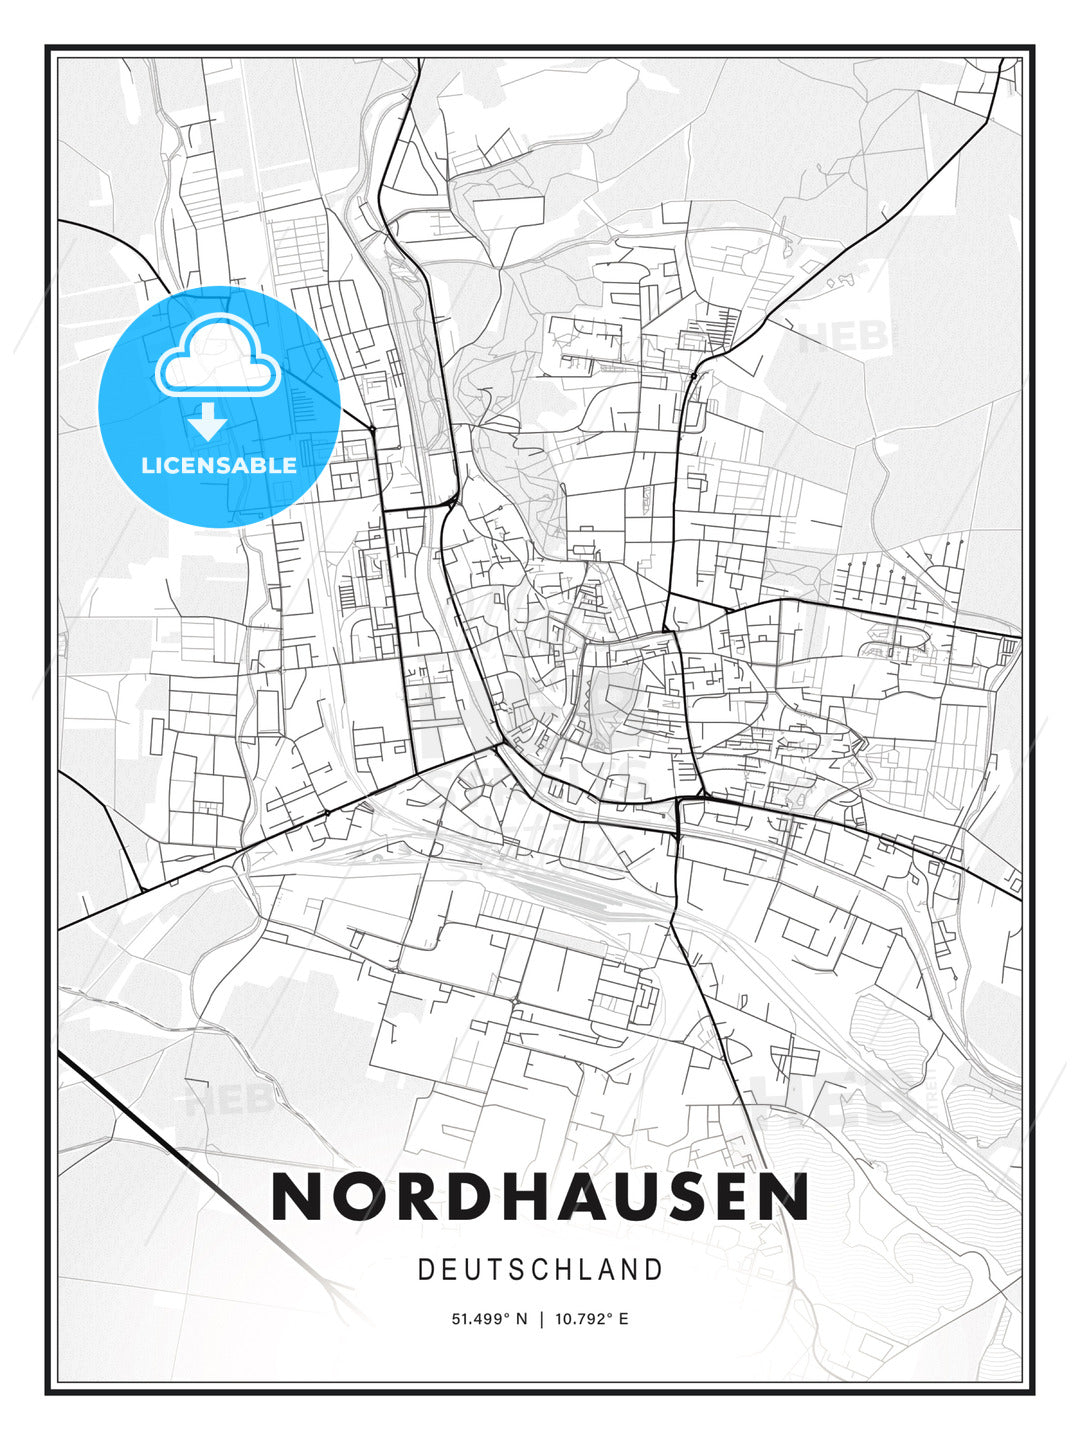 Nordhausen, Germany, Modern Print Template in Various Formats - HEBSTREITS Sketches